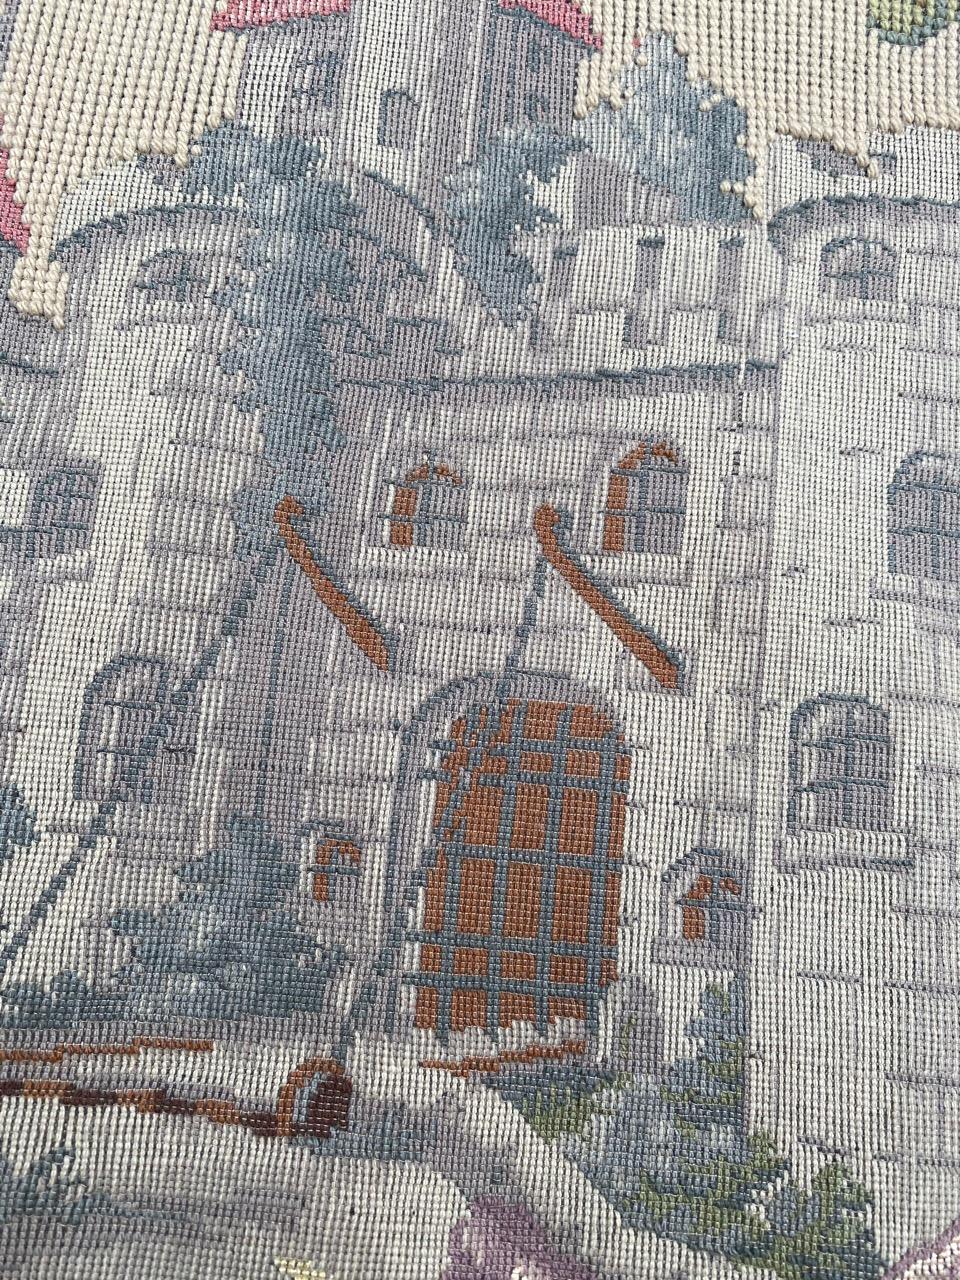 Bobyrug’s Pretty Vintage Aubusson Style French Jaquar Tapestry For Sale 4